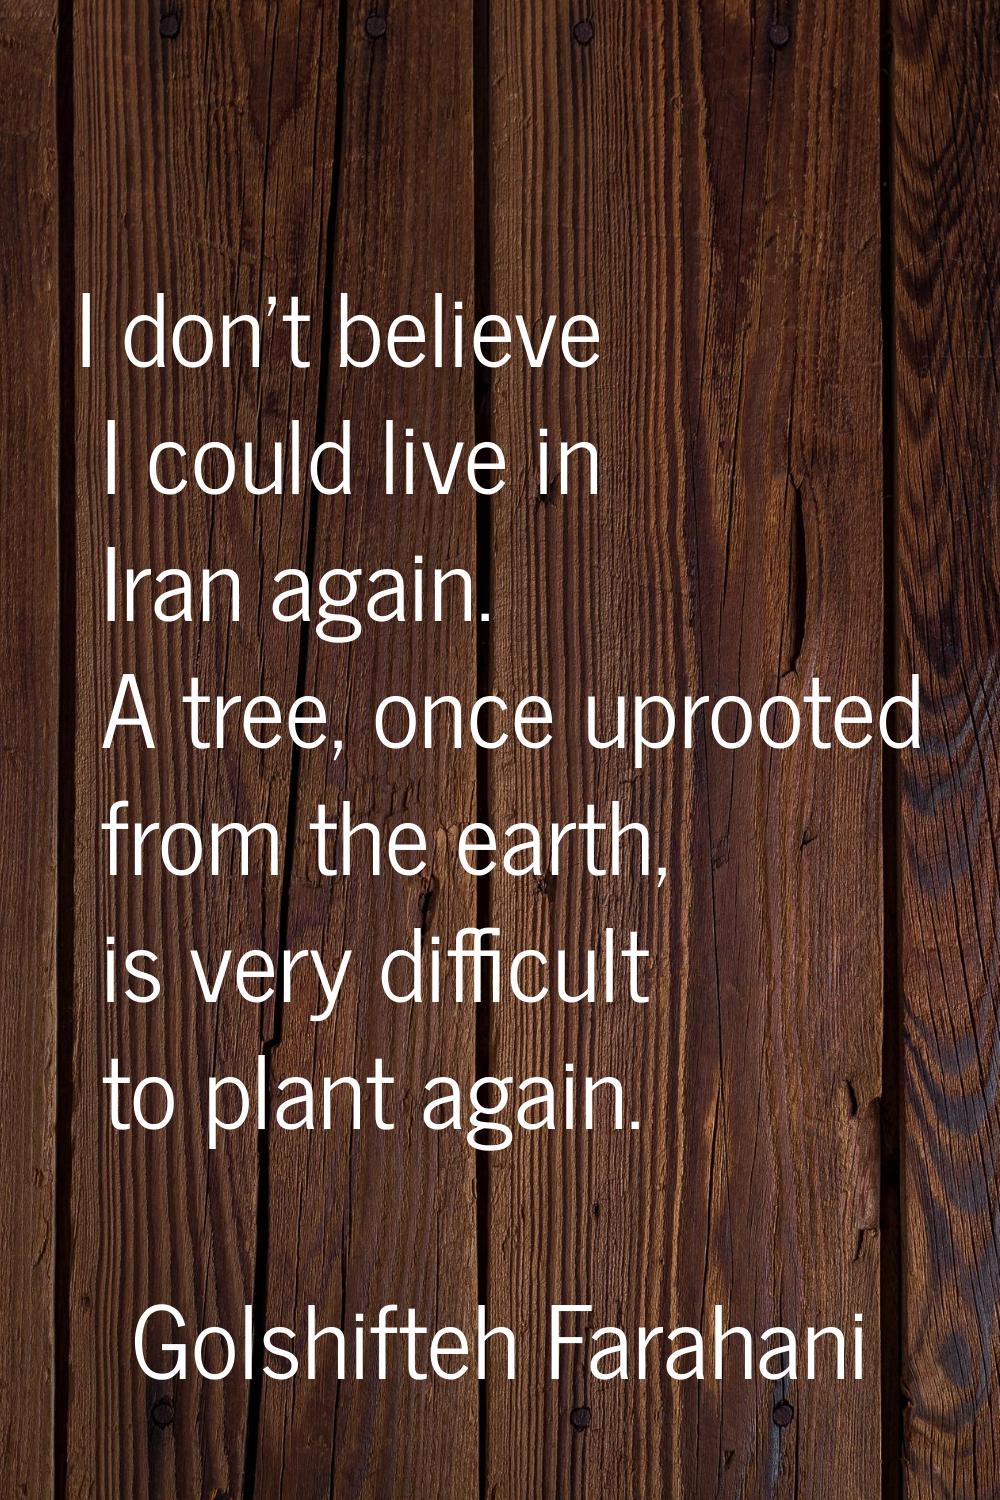 I don't believe I could live in Iran again. A tree, once uprooted from the earth, is very difficult